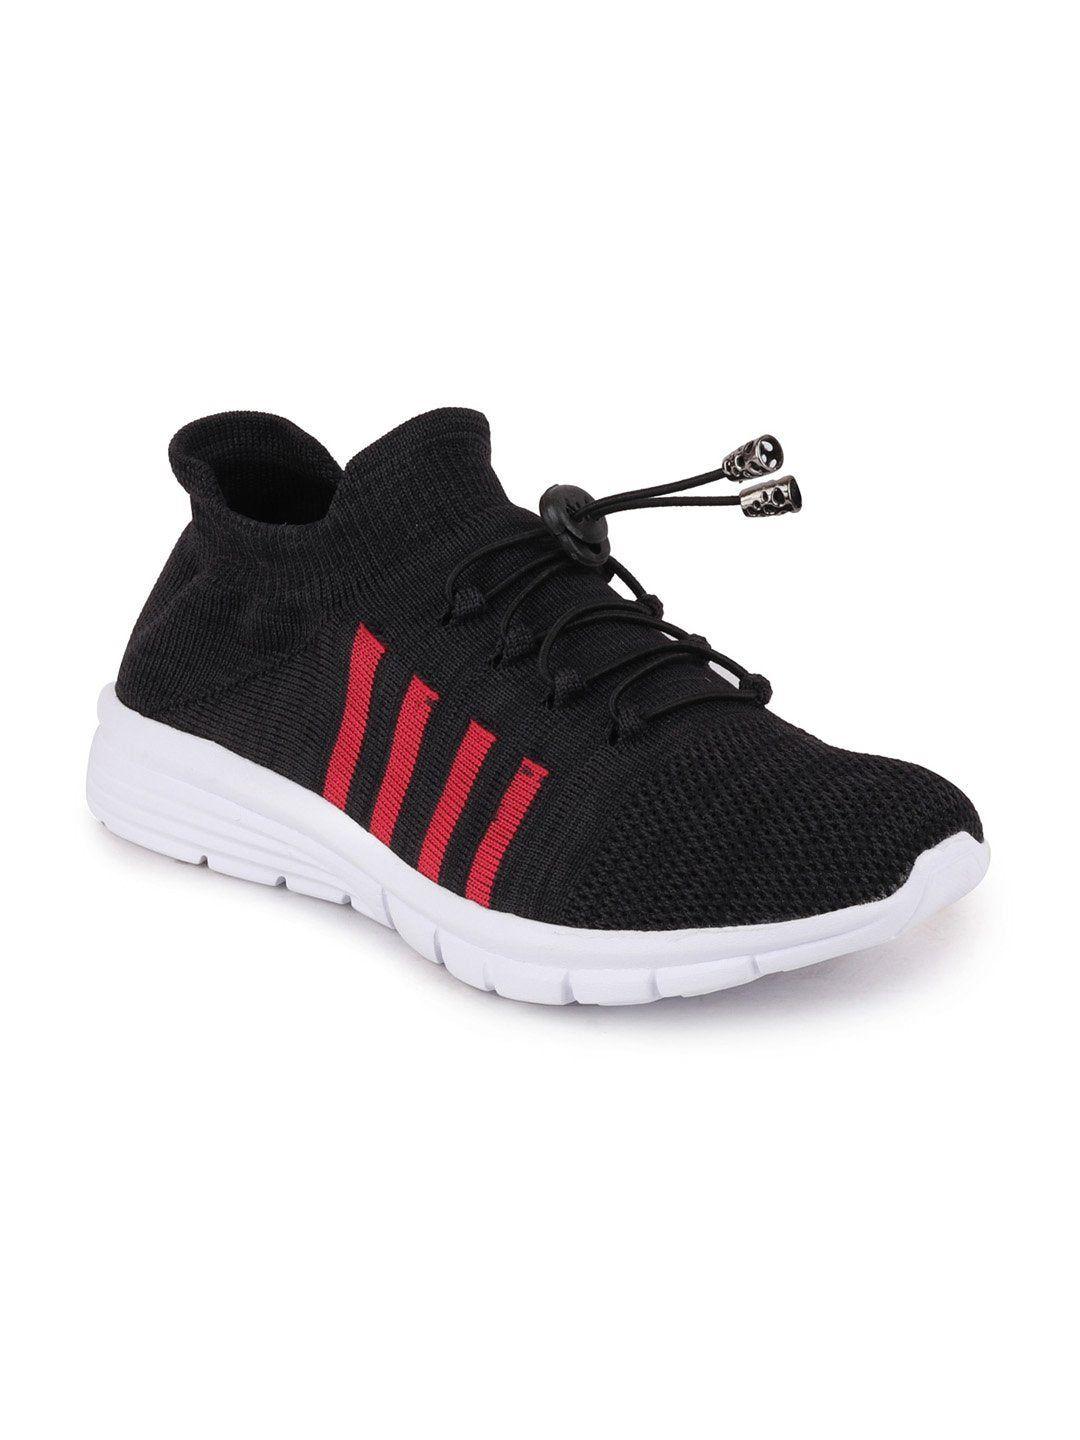 fausto-men-black-mesh-running-non-marking-lace-up-sports-shoes